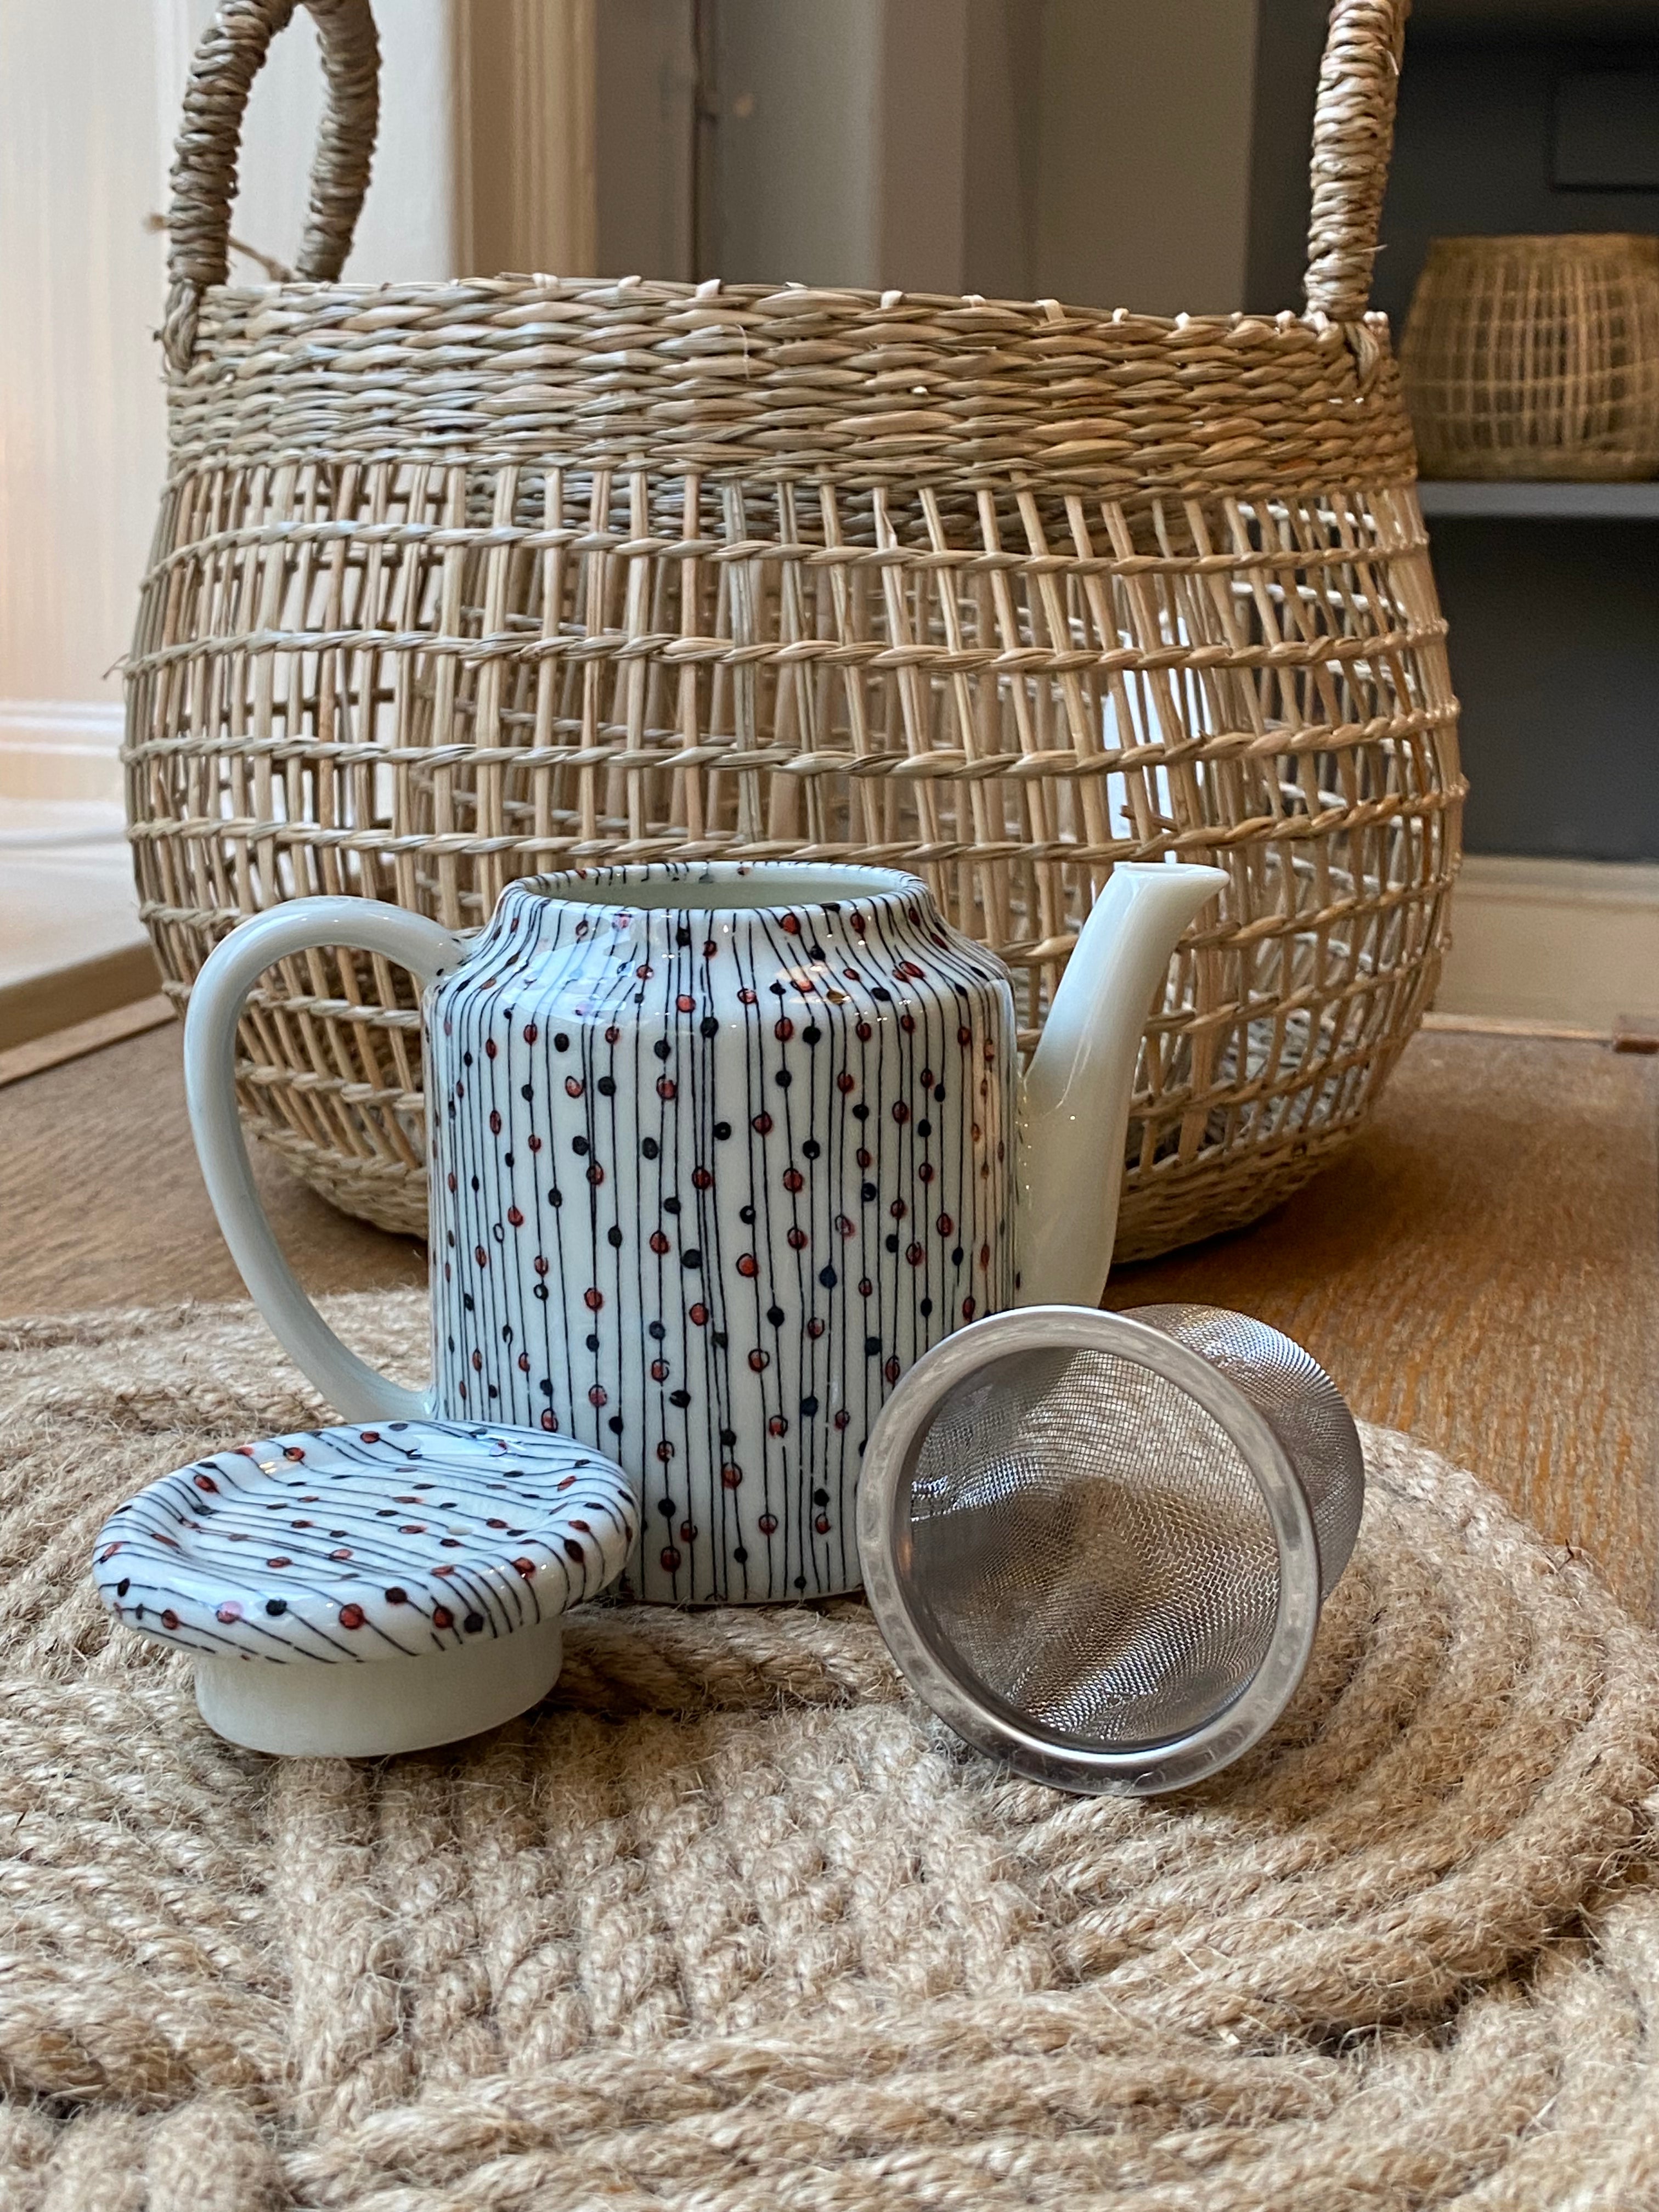 Small teapot with lines and dots